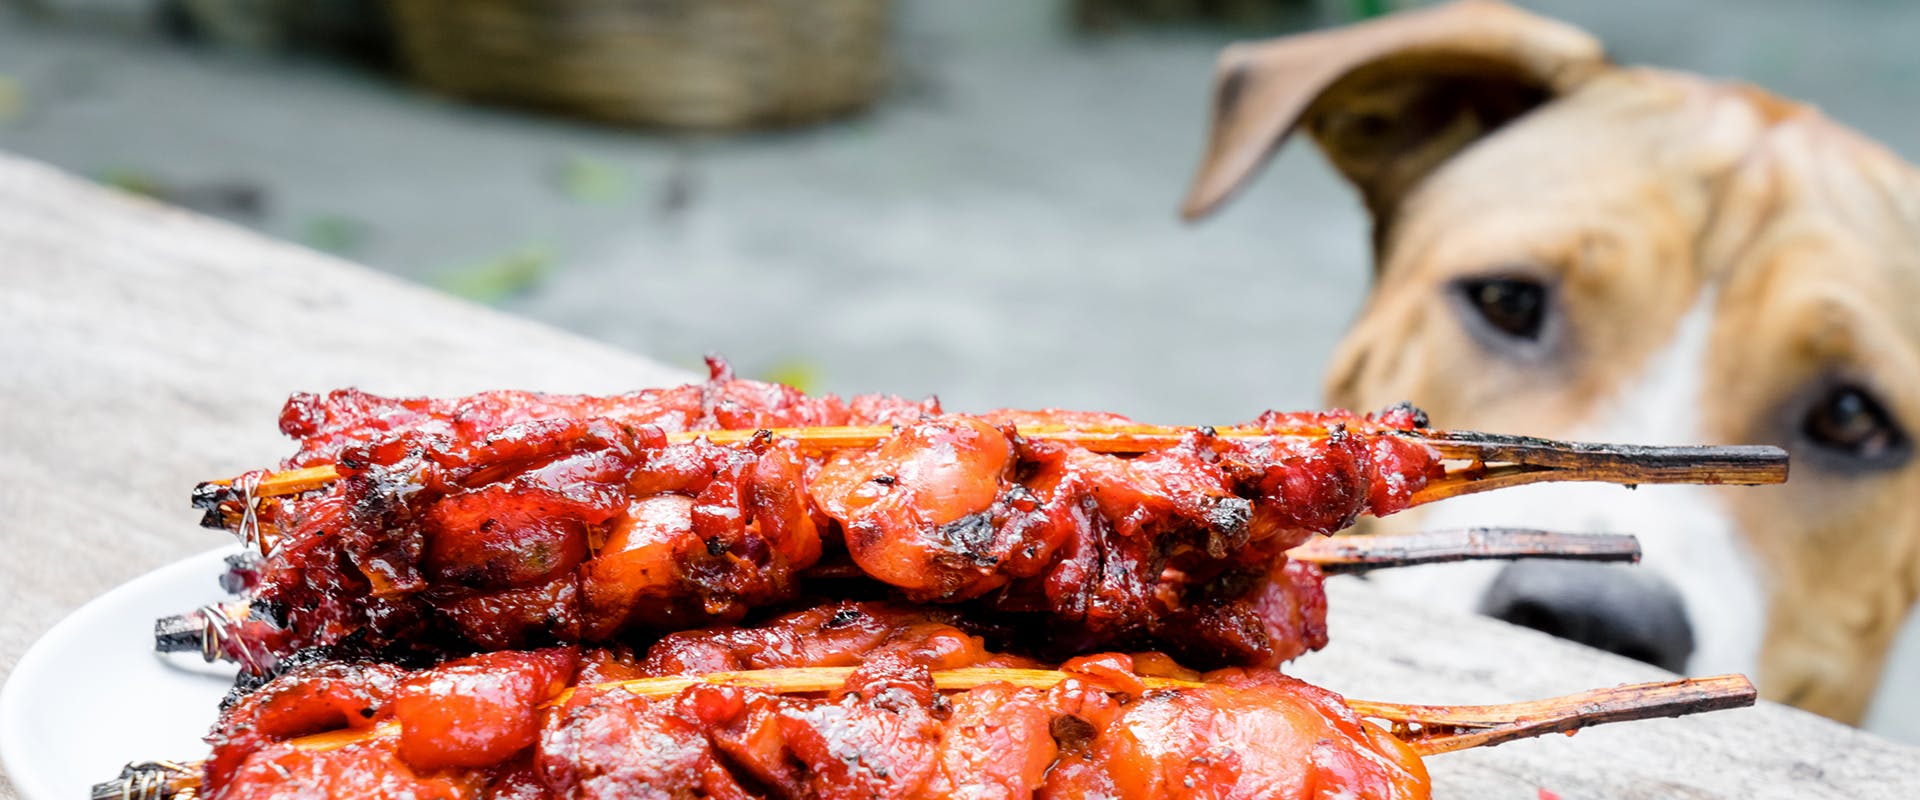 A dog staring at a plate of barbecued meat